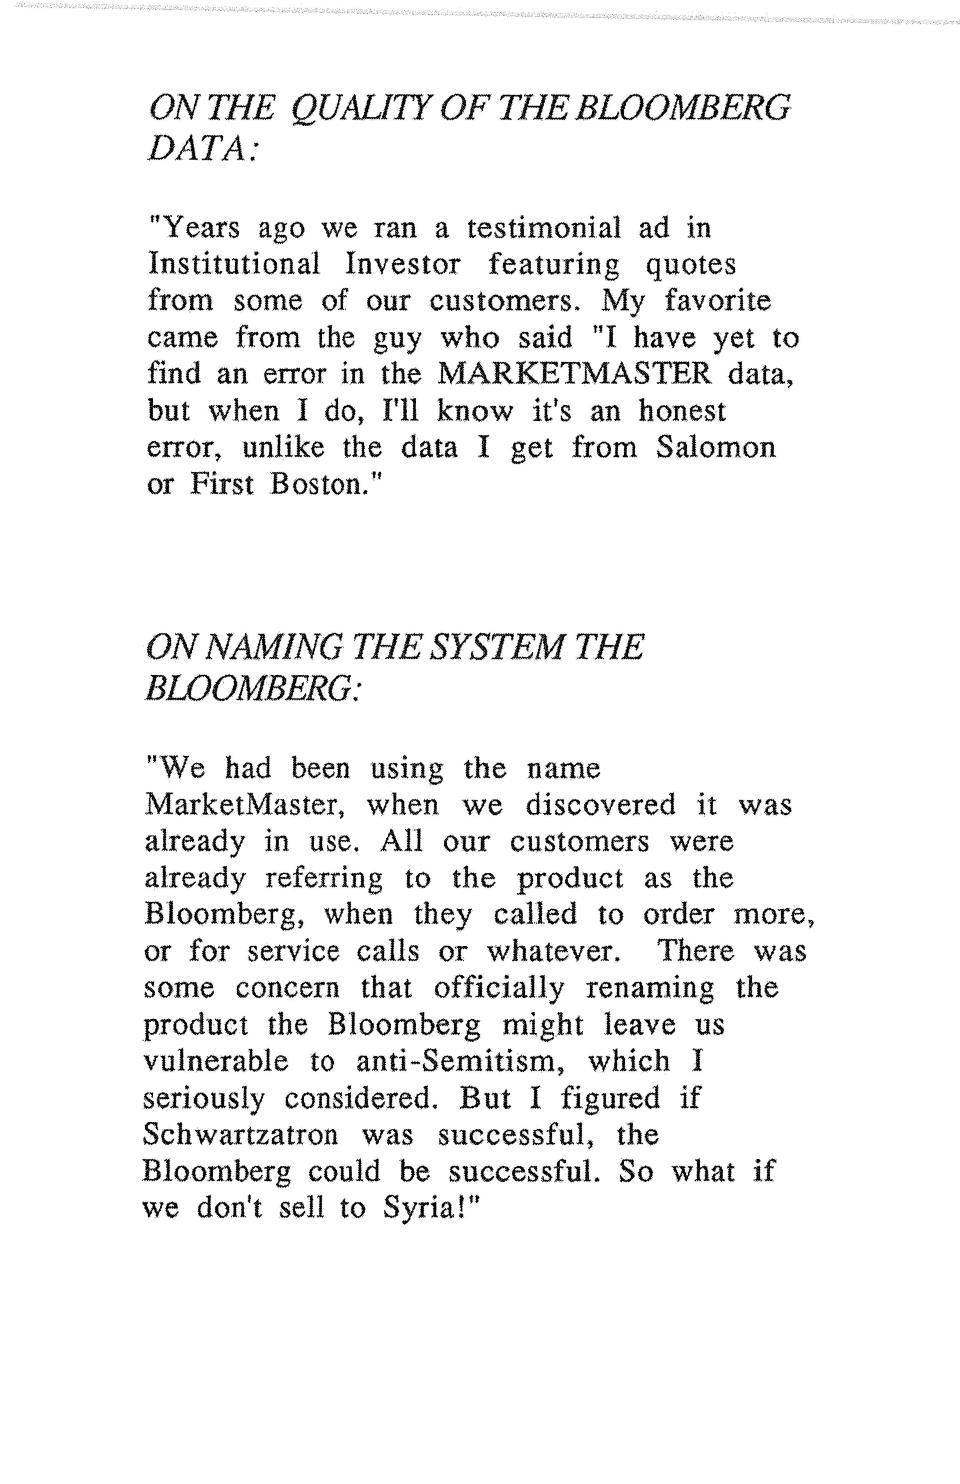 Page 19, The Portable Bloomberg